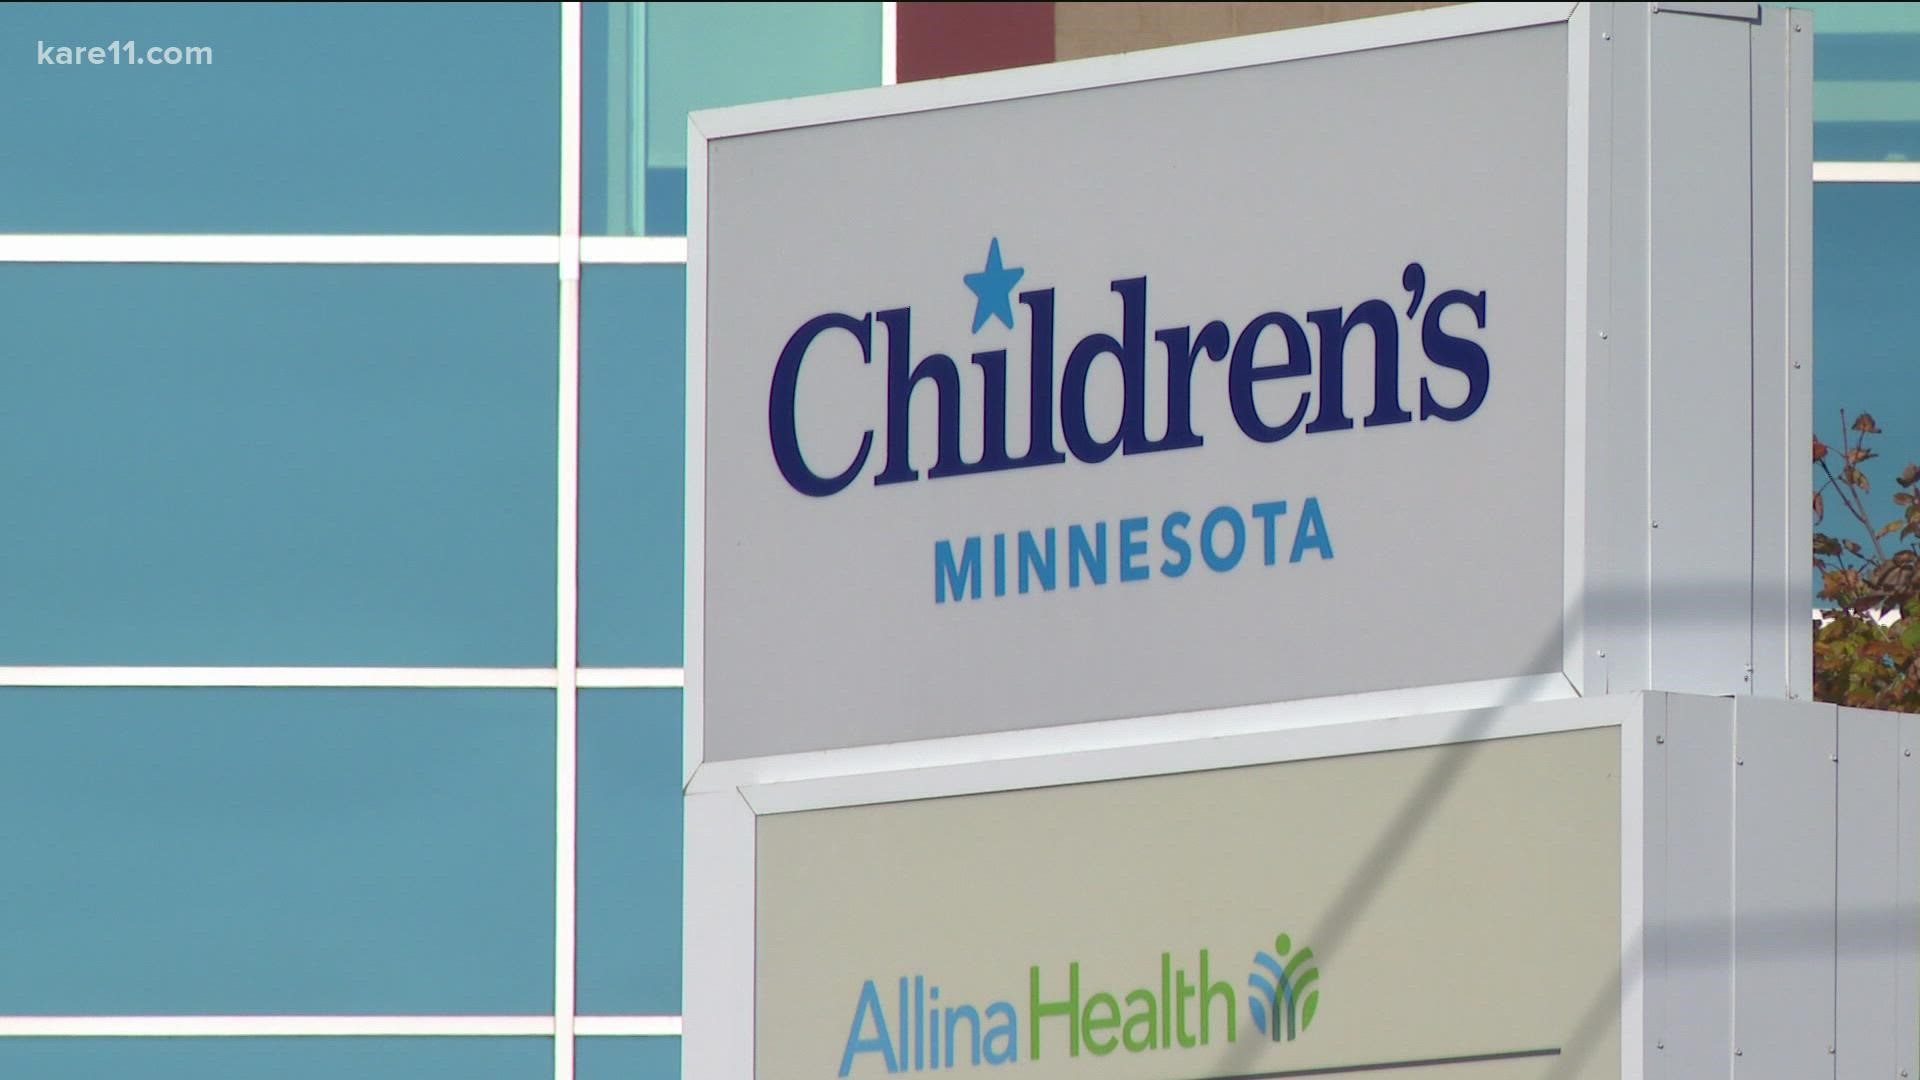 Children's Minnesota hospital will take young adults during COVID-19 fight  - Minneapolis / St. Paul Business Journal